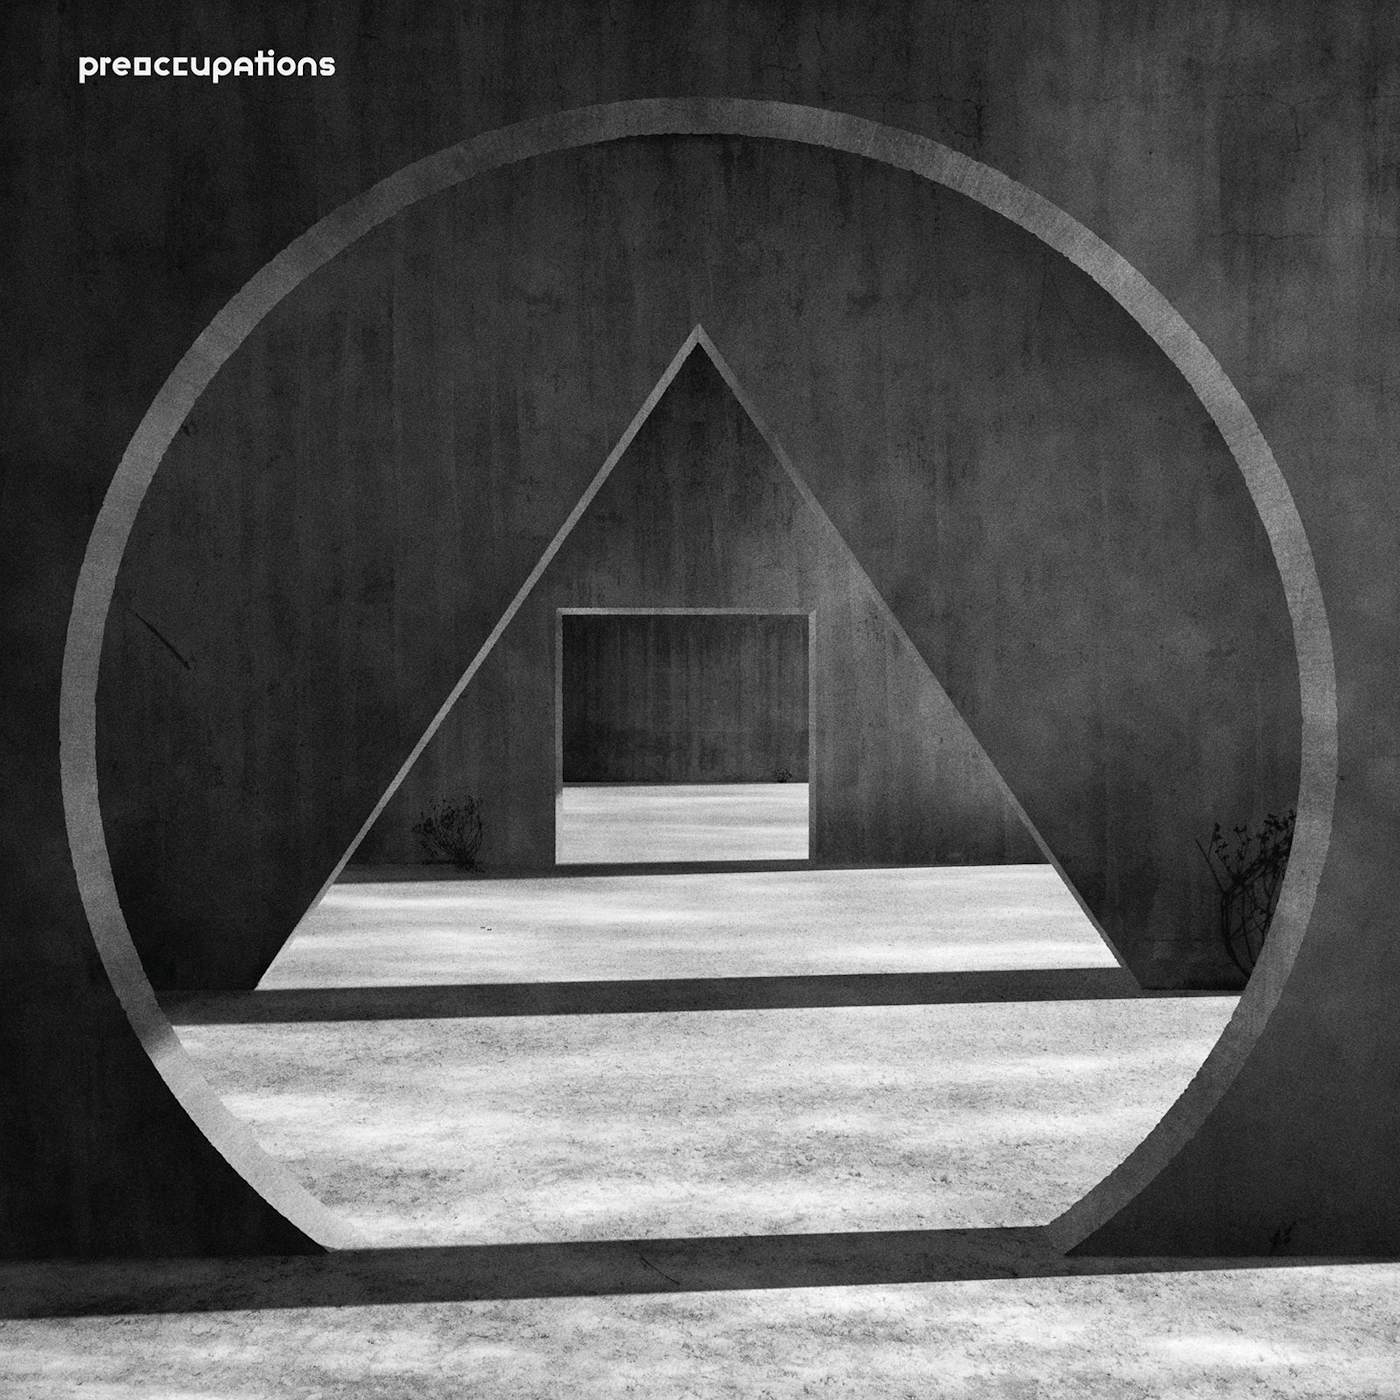 Preoccupations NEW MATERIAL CD